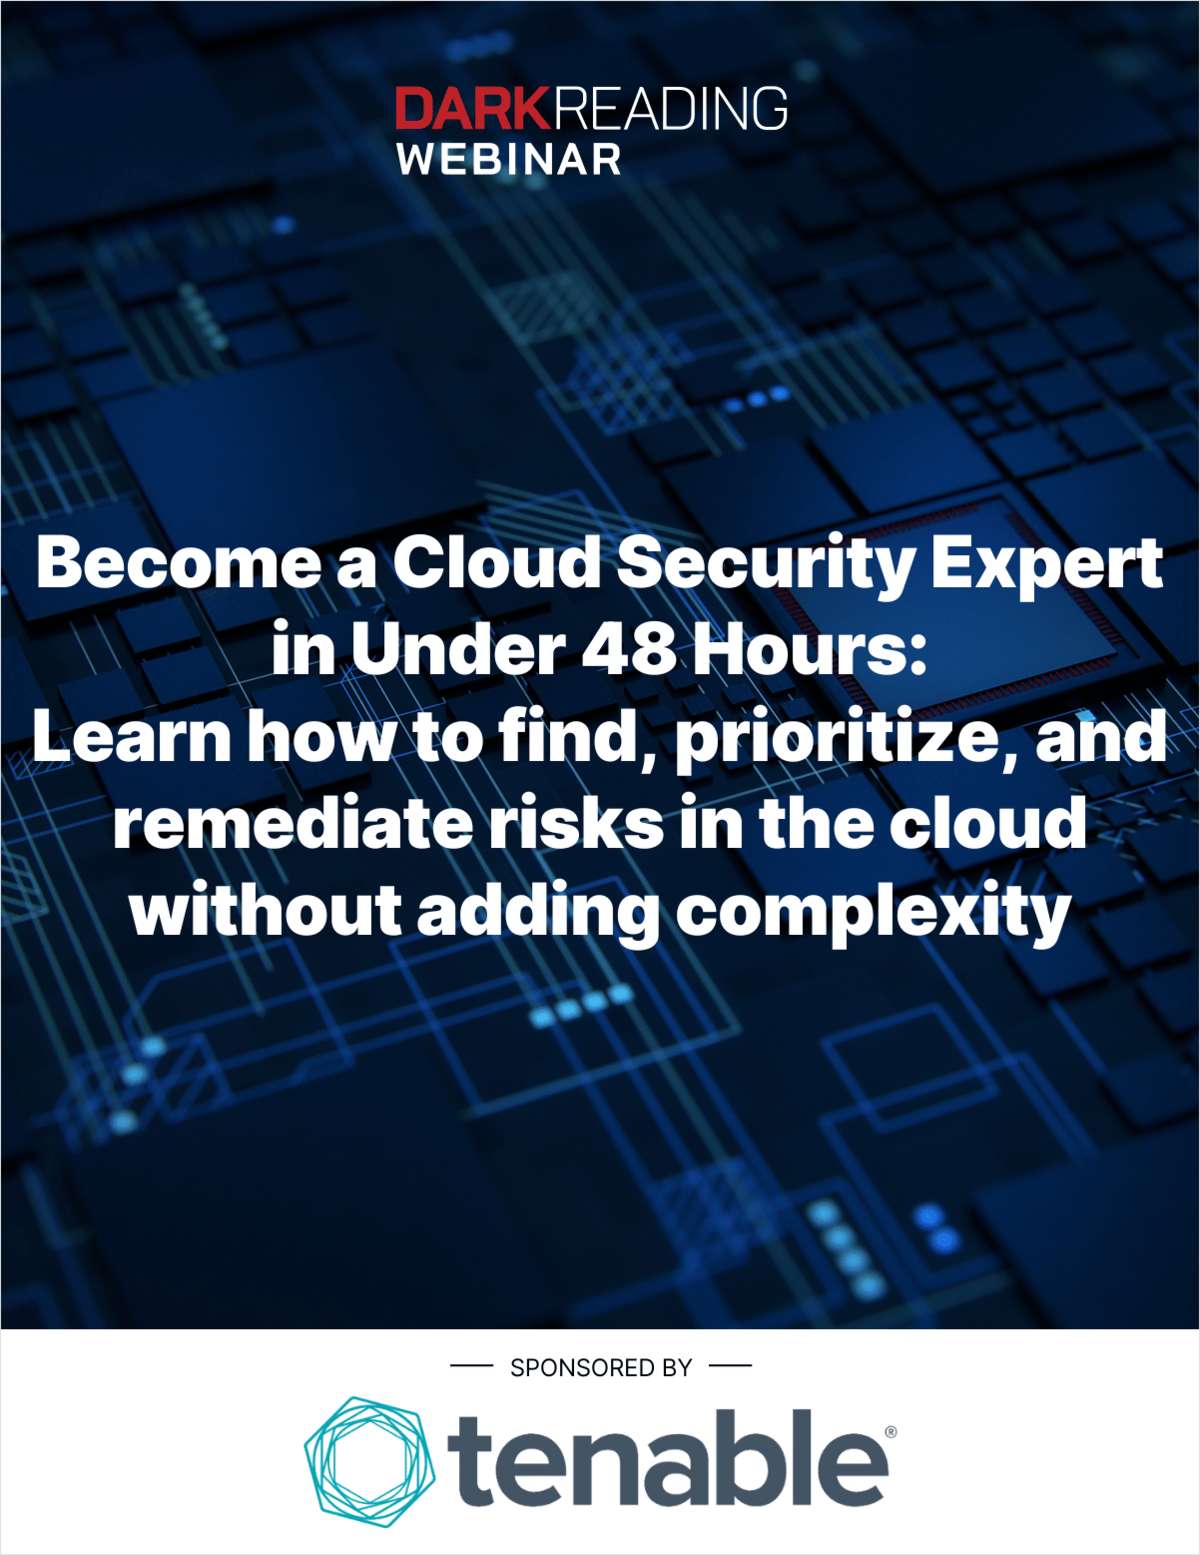 Become a Cloud Security Expert in Under 48 Hours: Learn how to find, prioritize, and remediate risks in the cloud without adding complexity